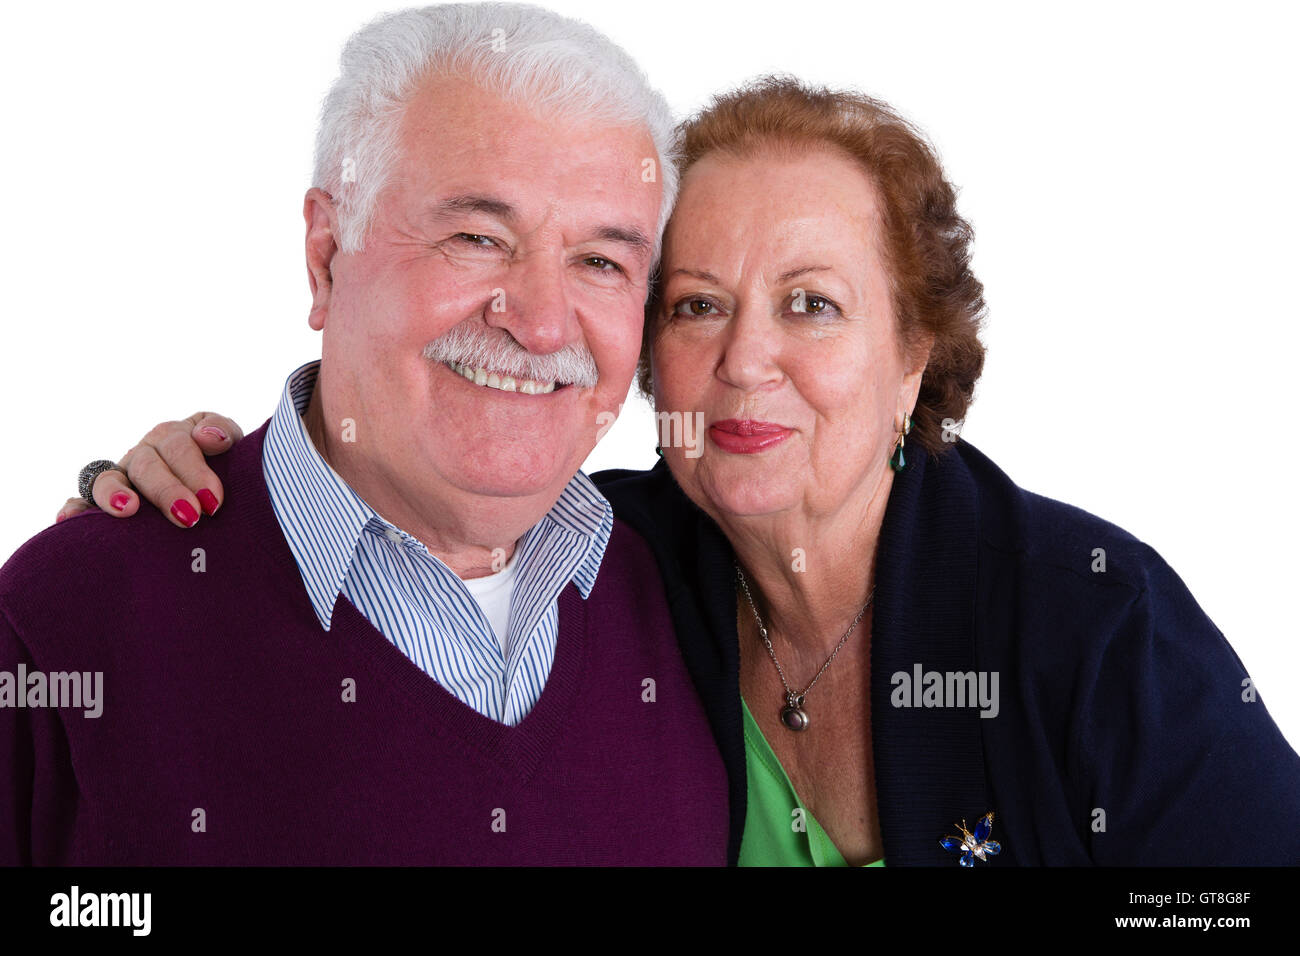 Happy loving senior couple posing in a close embrace smiling happily at the camera, head and shoulders portrait isolated on whit Stock Photo